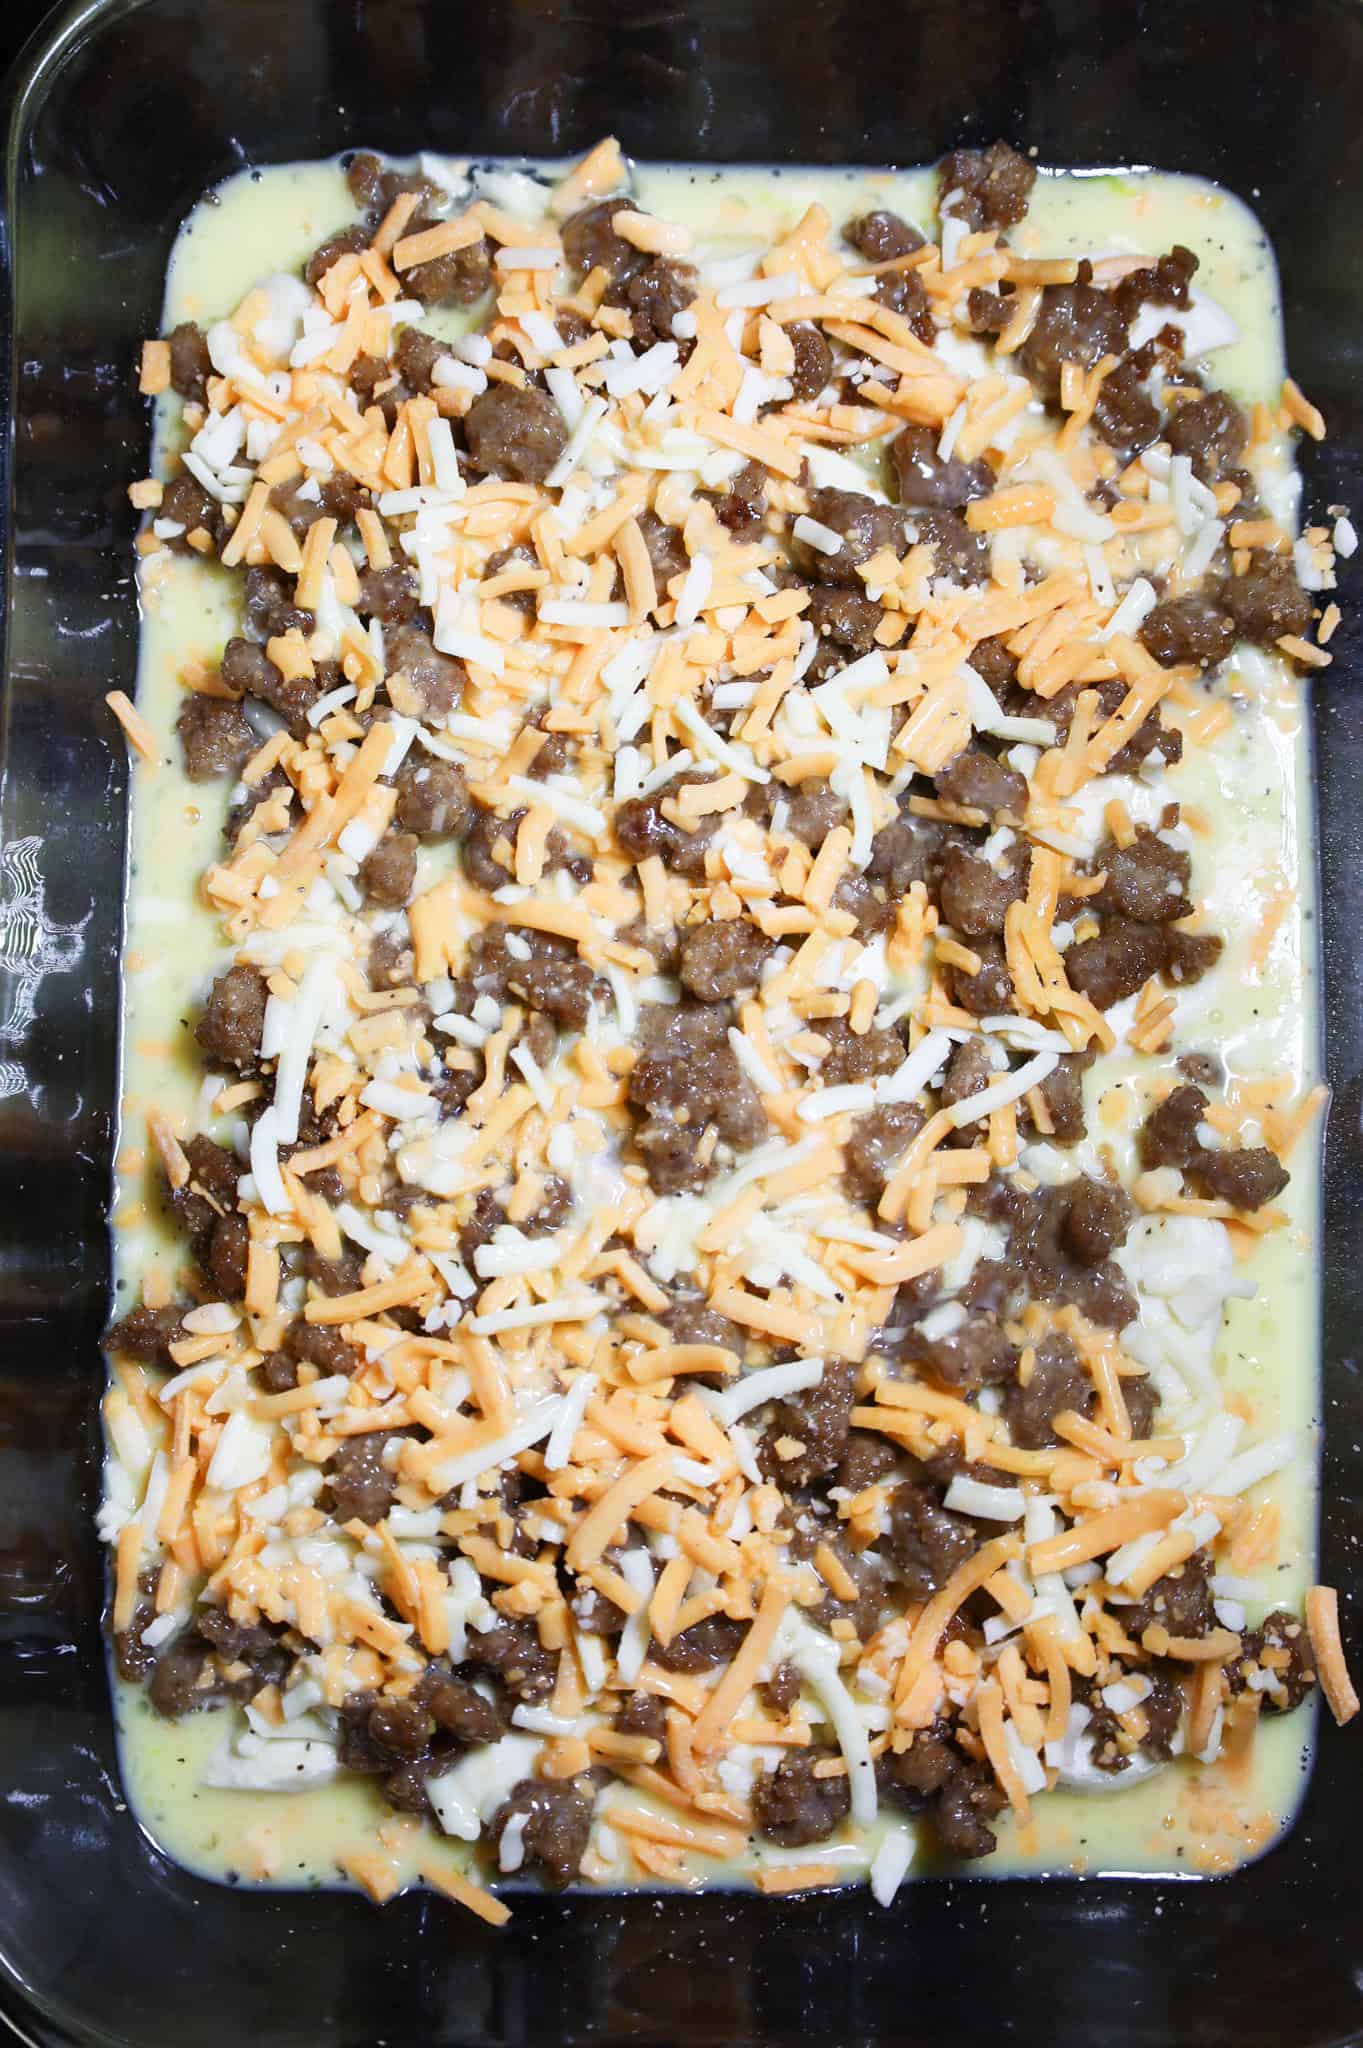 shredded cheese on top of sausage and biscuits in a baking dish with egg mixture